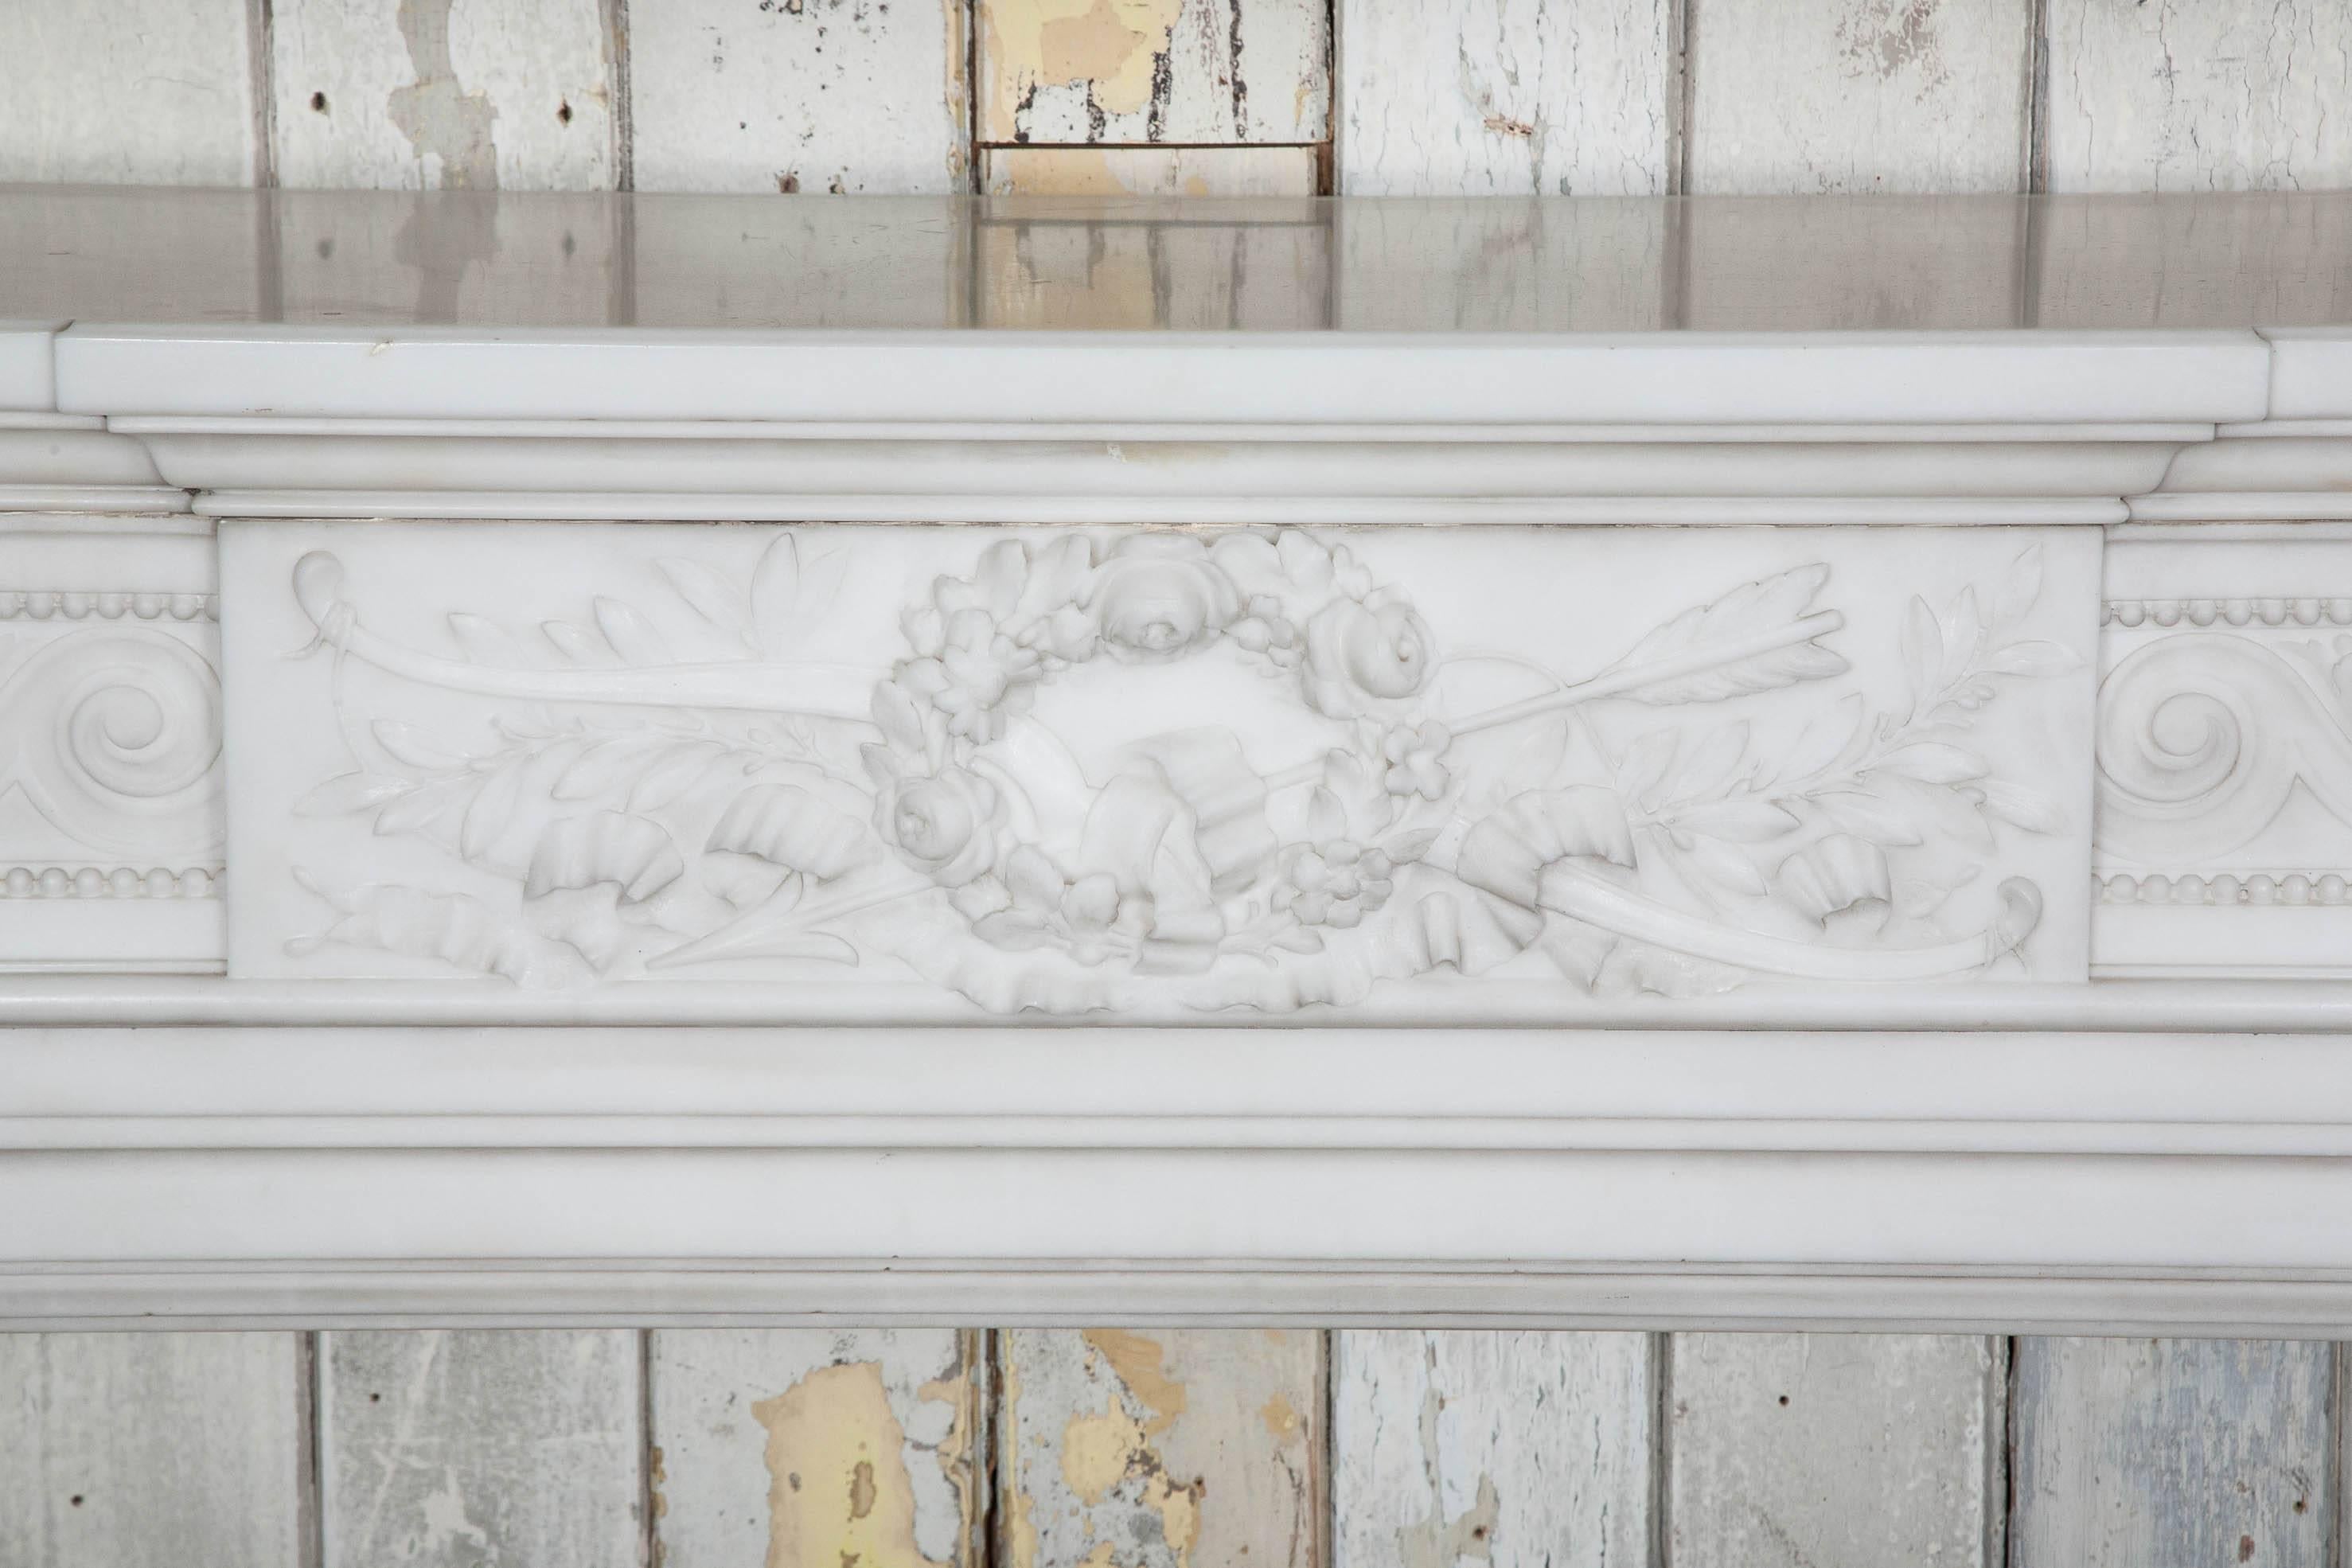 A pair of outstanding antique French style mantelpieces in white statuary marble. These original nineteenth century fireplace surrounds are in the Louis XVI manner, with palatial proportions and finely carved decoration. The paneled frieze features